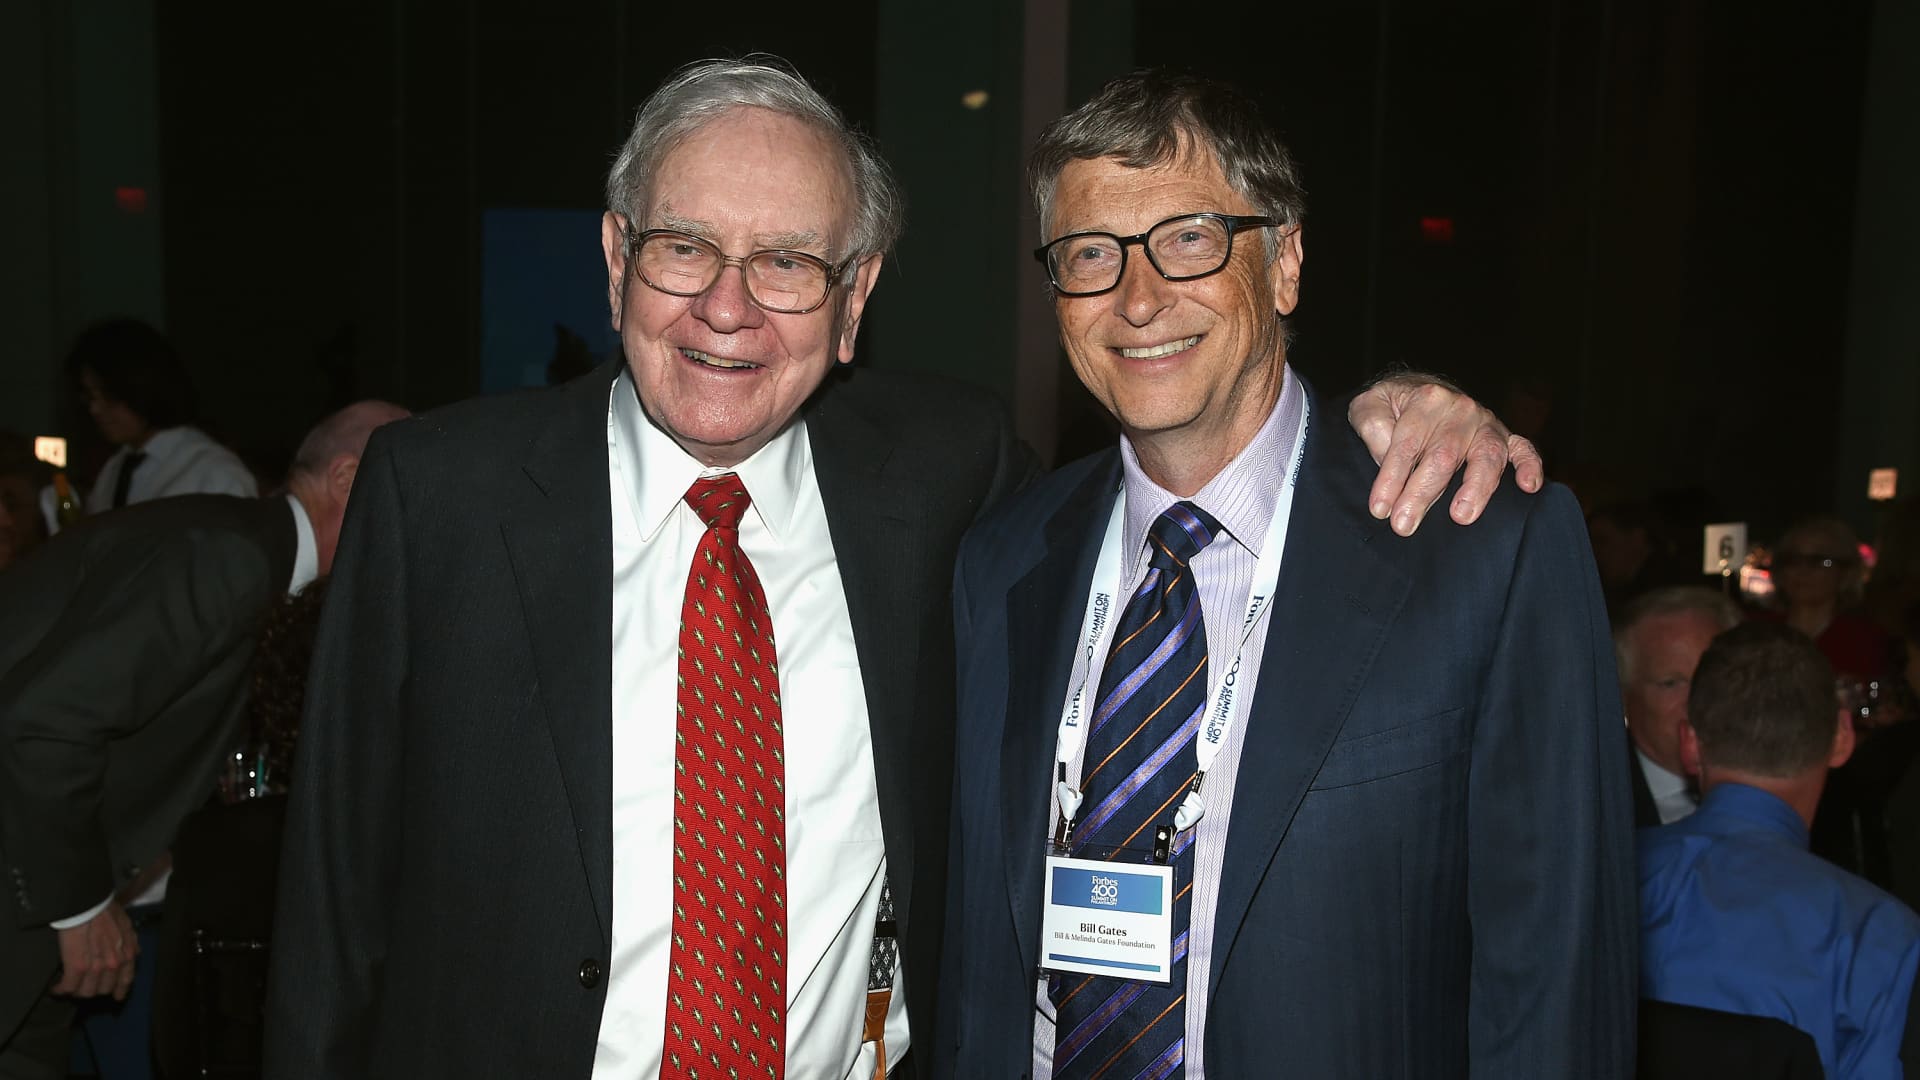 Bill Gates says Warren Buffett gave the best advice he's ever received—it's 'maybe the most important thing' he's learned